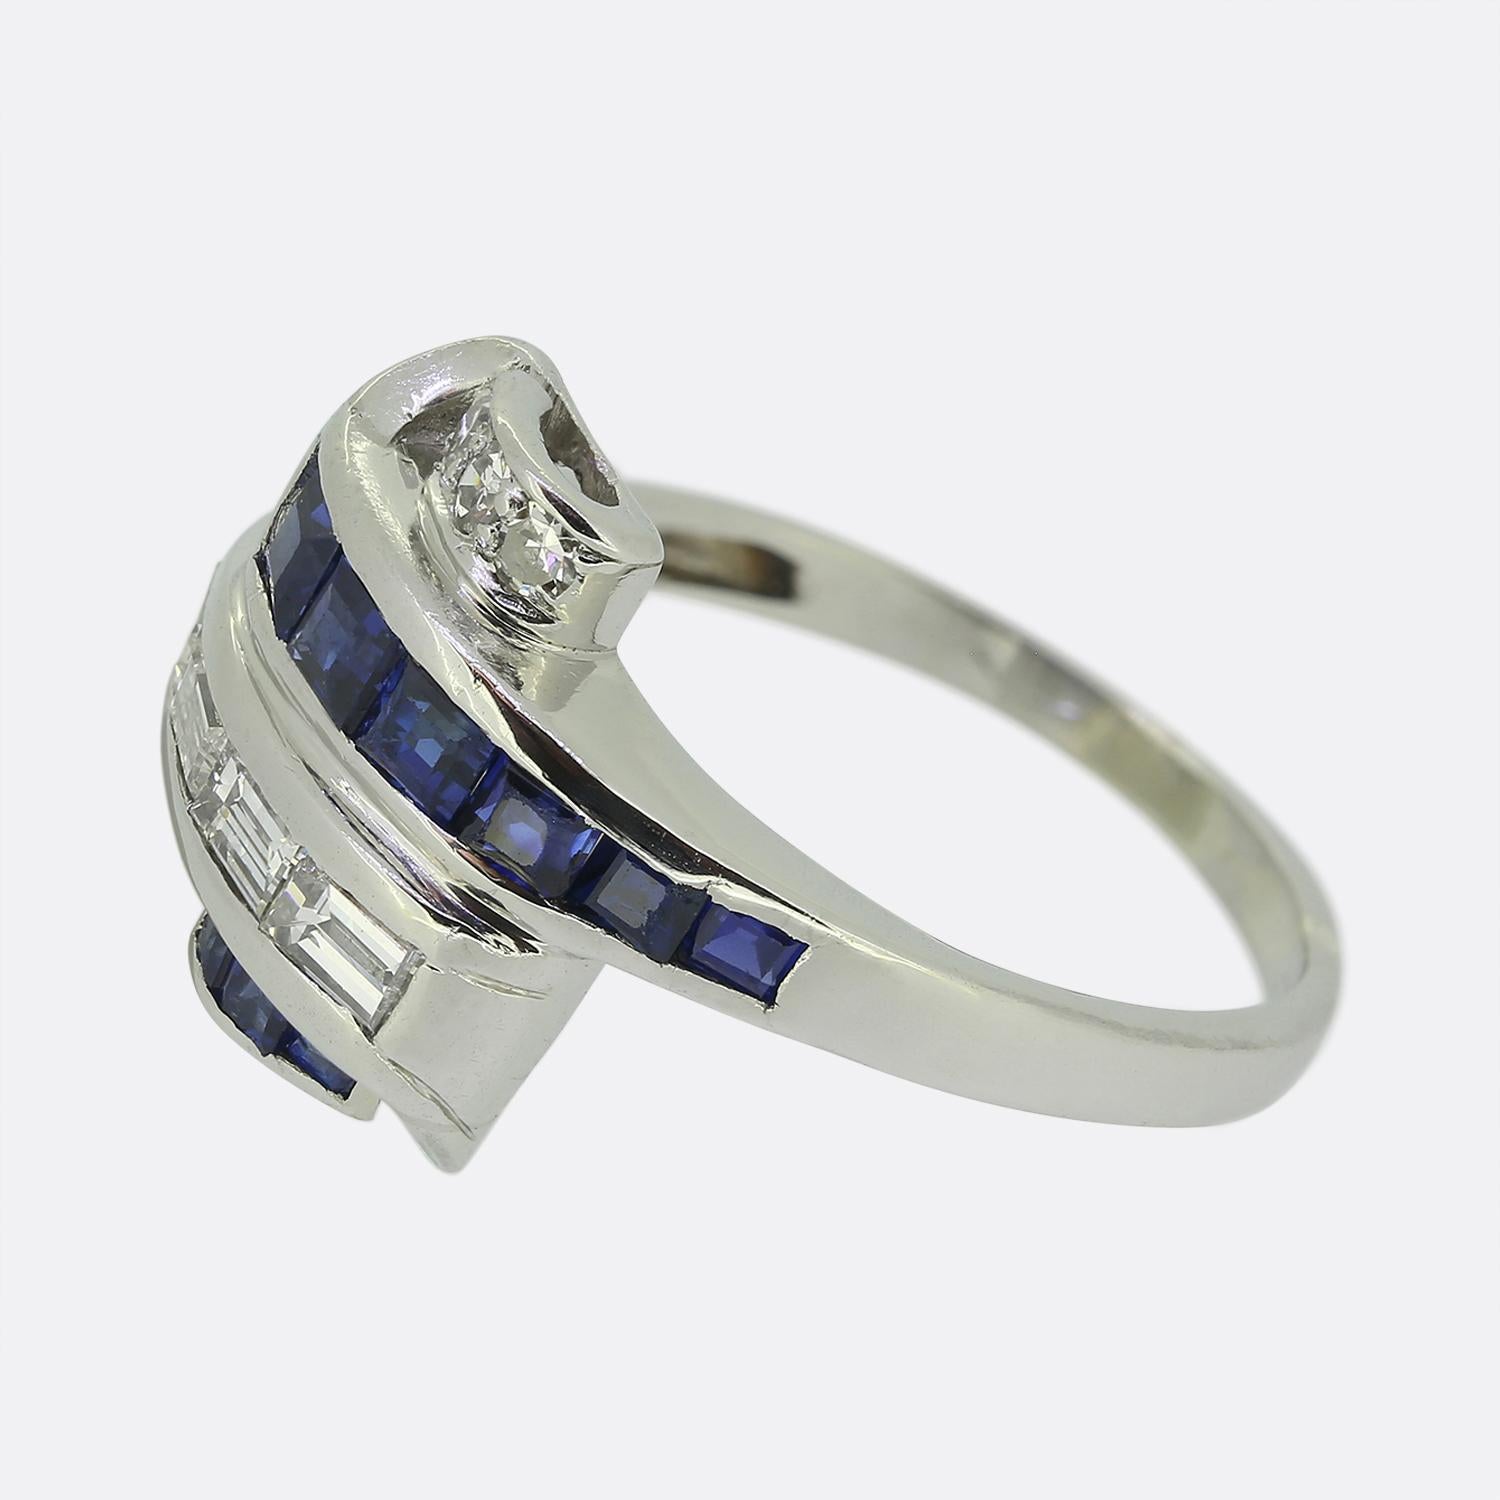 Here we have a sleek and stylish ring crafted towards the end of the Art Deco movement. This platinum piece showcases four alternating rows of sapphires and diamonds in a ribbon shaped head. A trio of eight cut diamonds sit at the top of the face